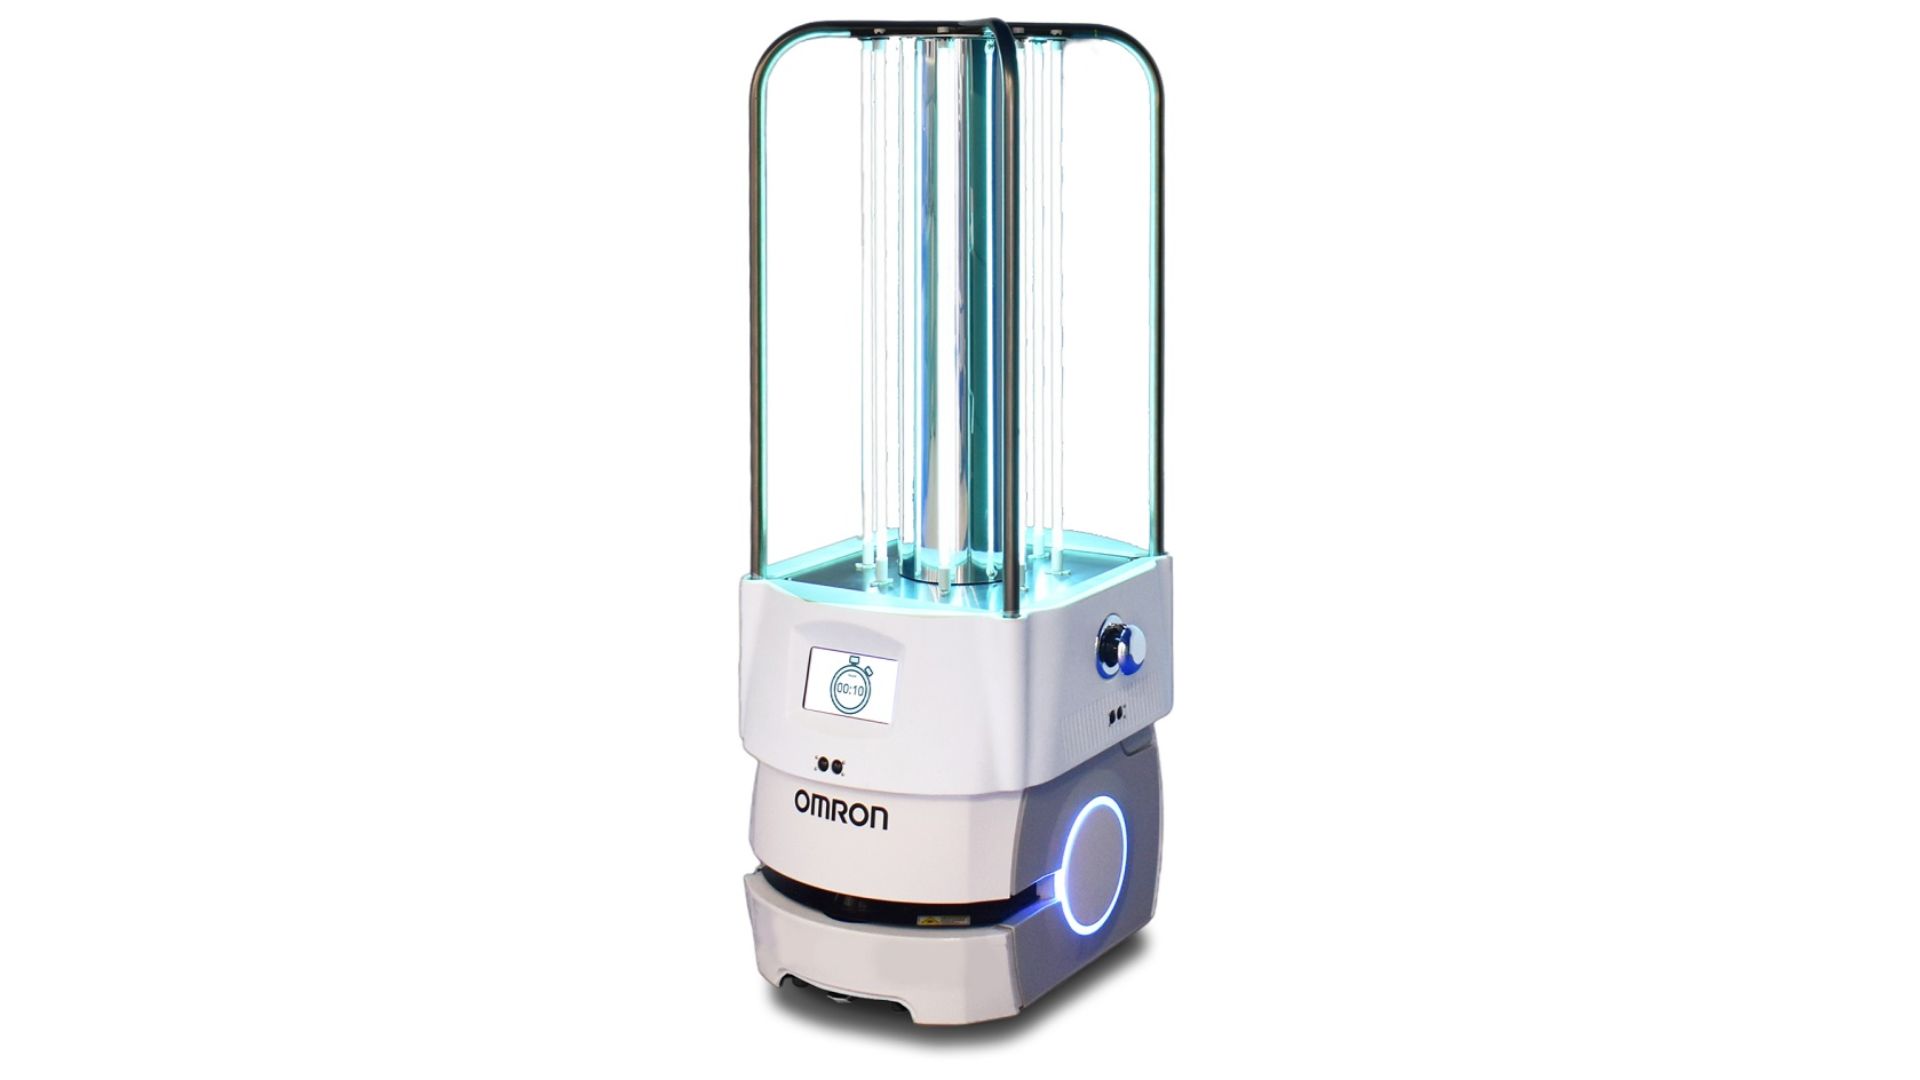 omron-introduces-uvc-disinfection-robot-products-suppliers-manufacturing-today-india